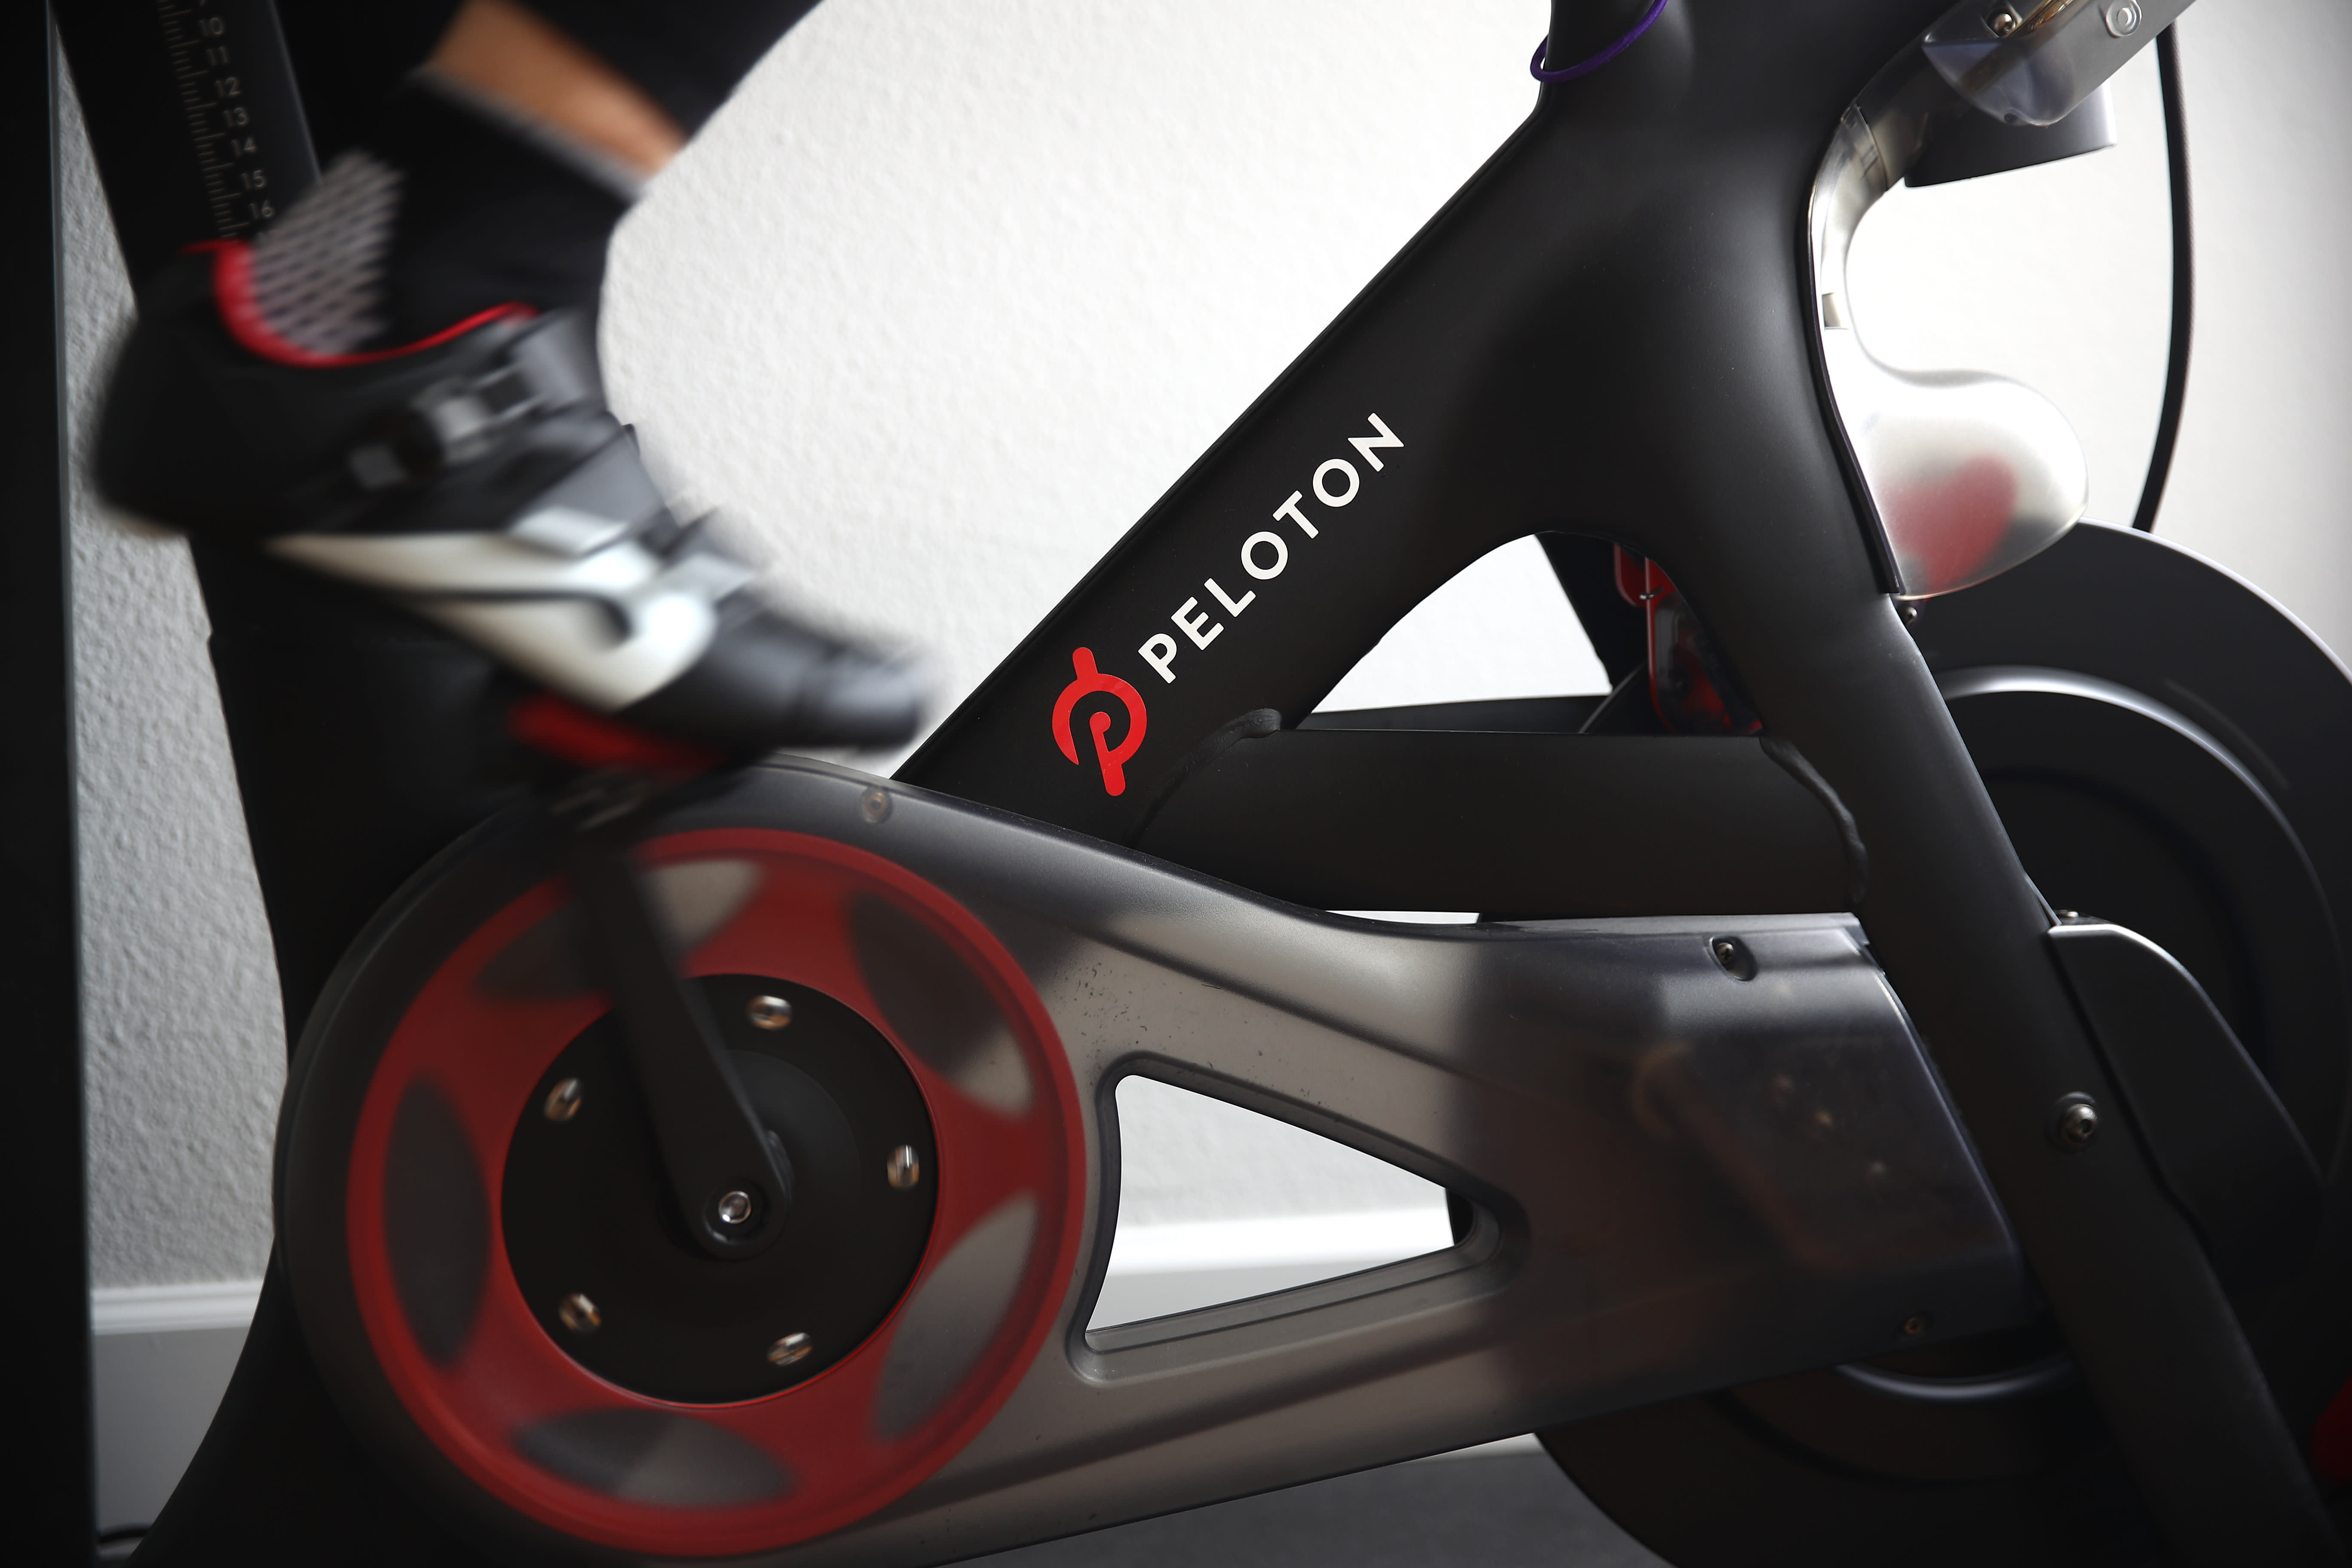 Peloton (PTON) shares fall after UBS hits cycle maker with downgrade